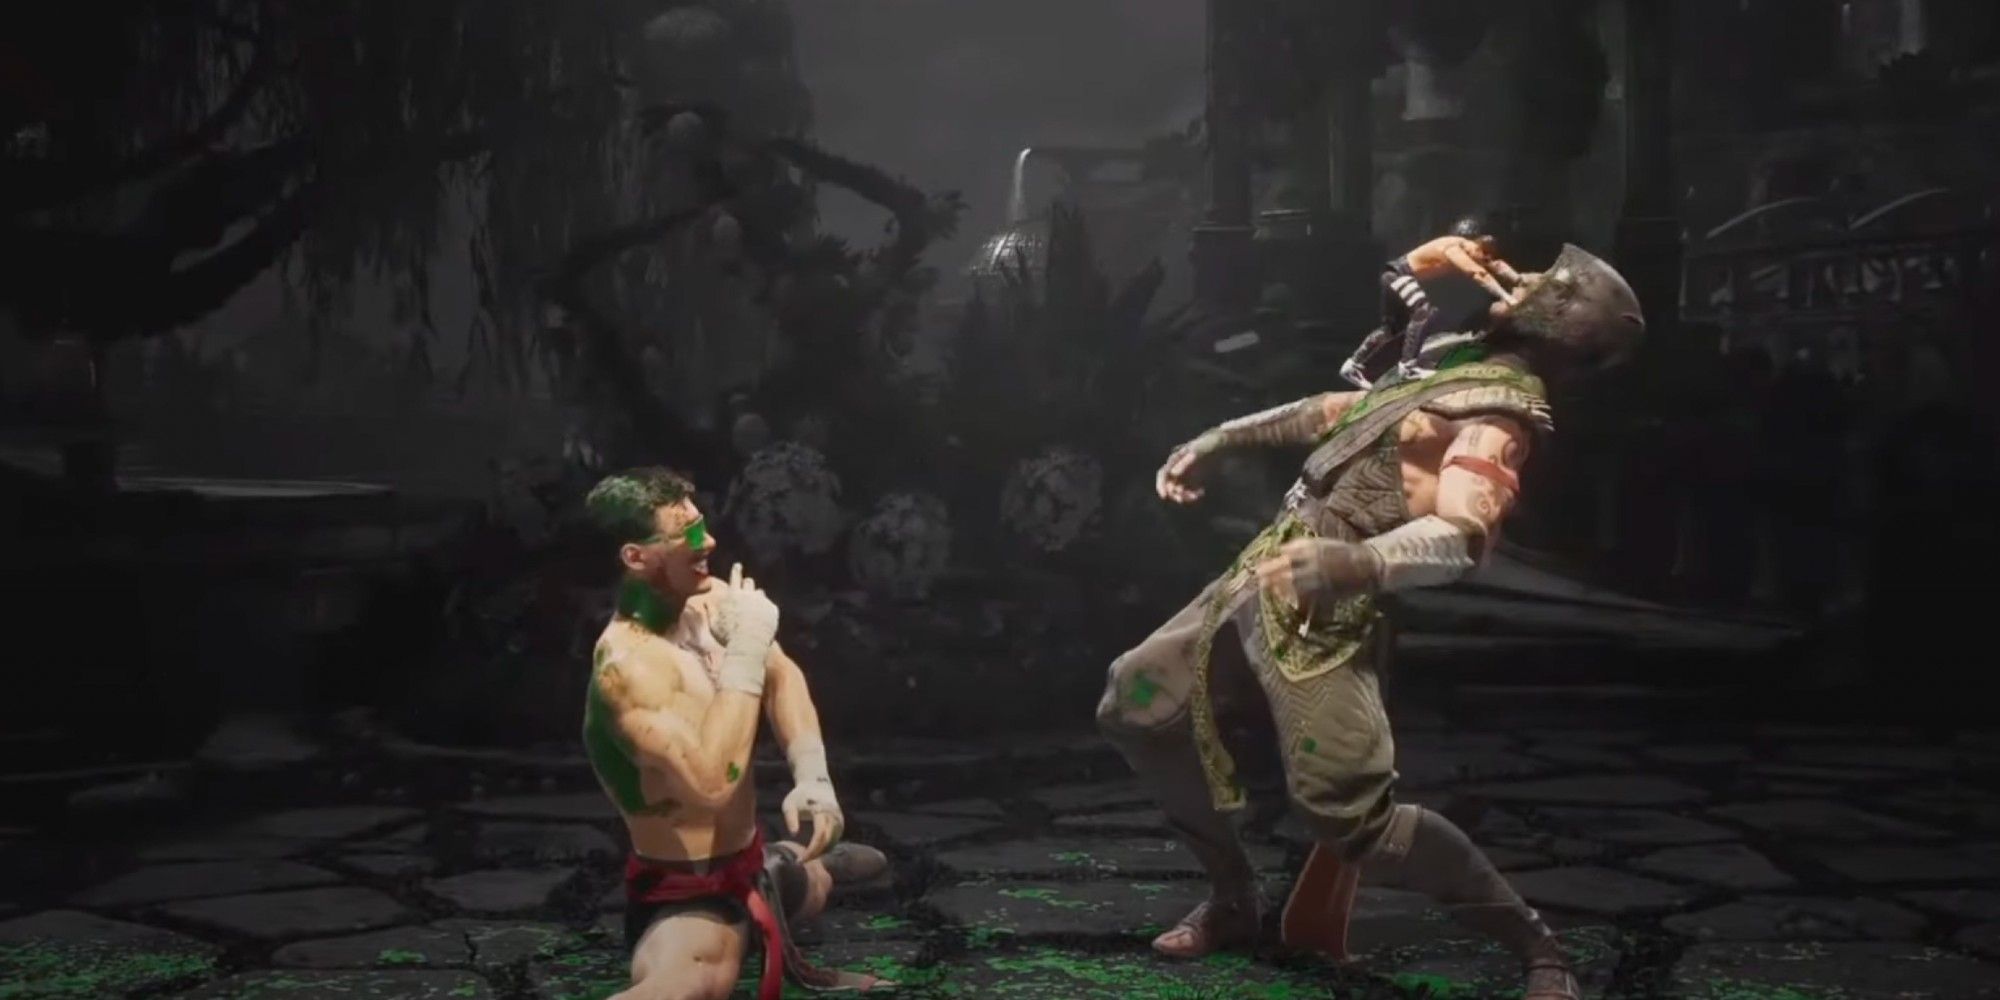 Johnny cage sitting down as an action figure attacks the enemy